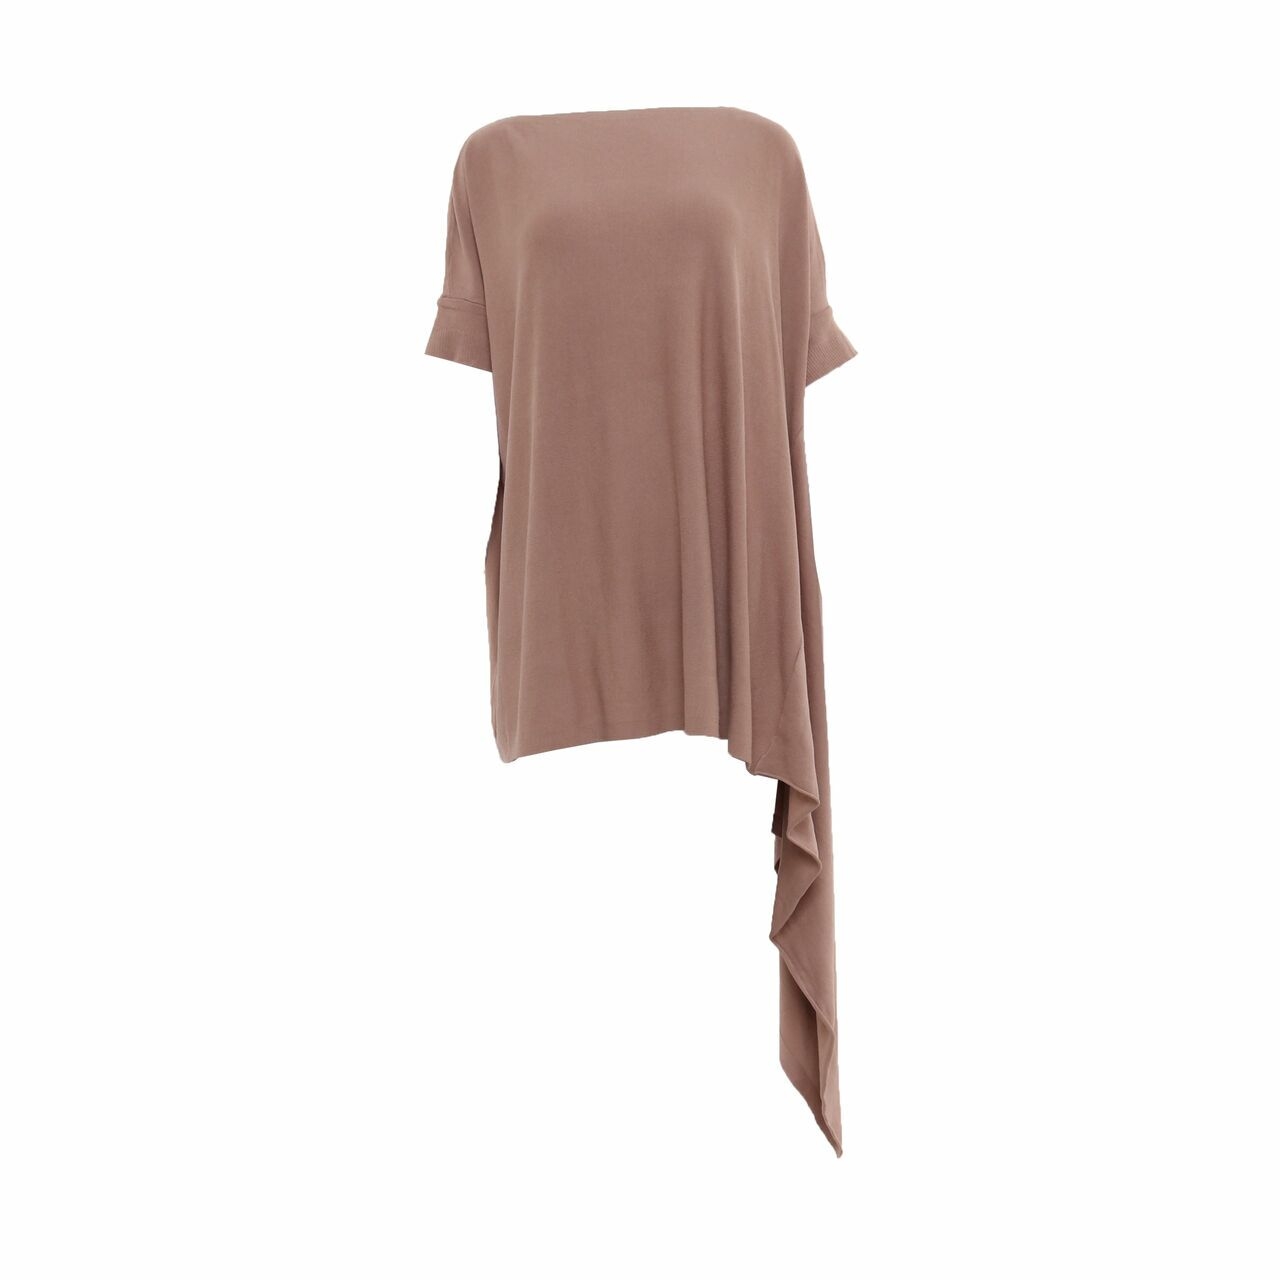 Uptown Girl Nude Knit Blouse